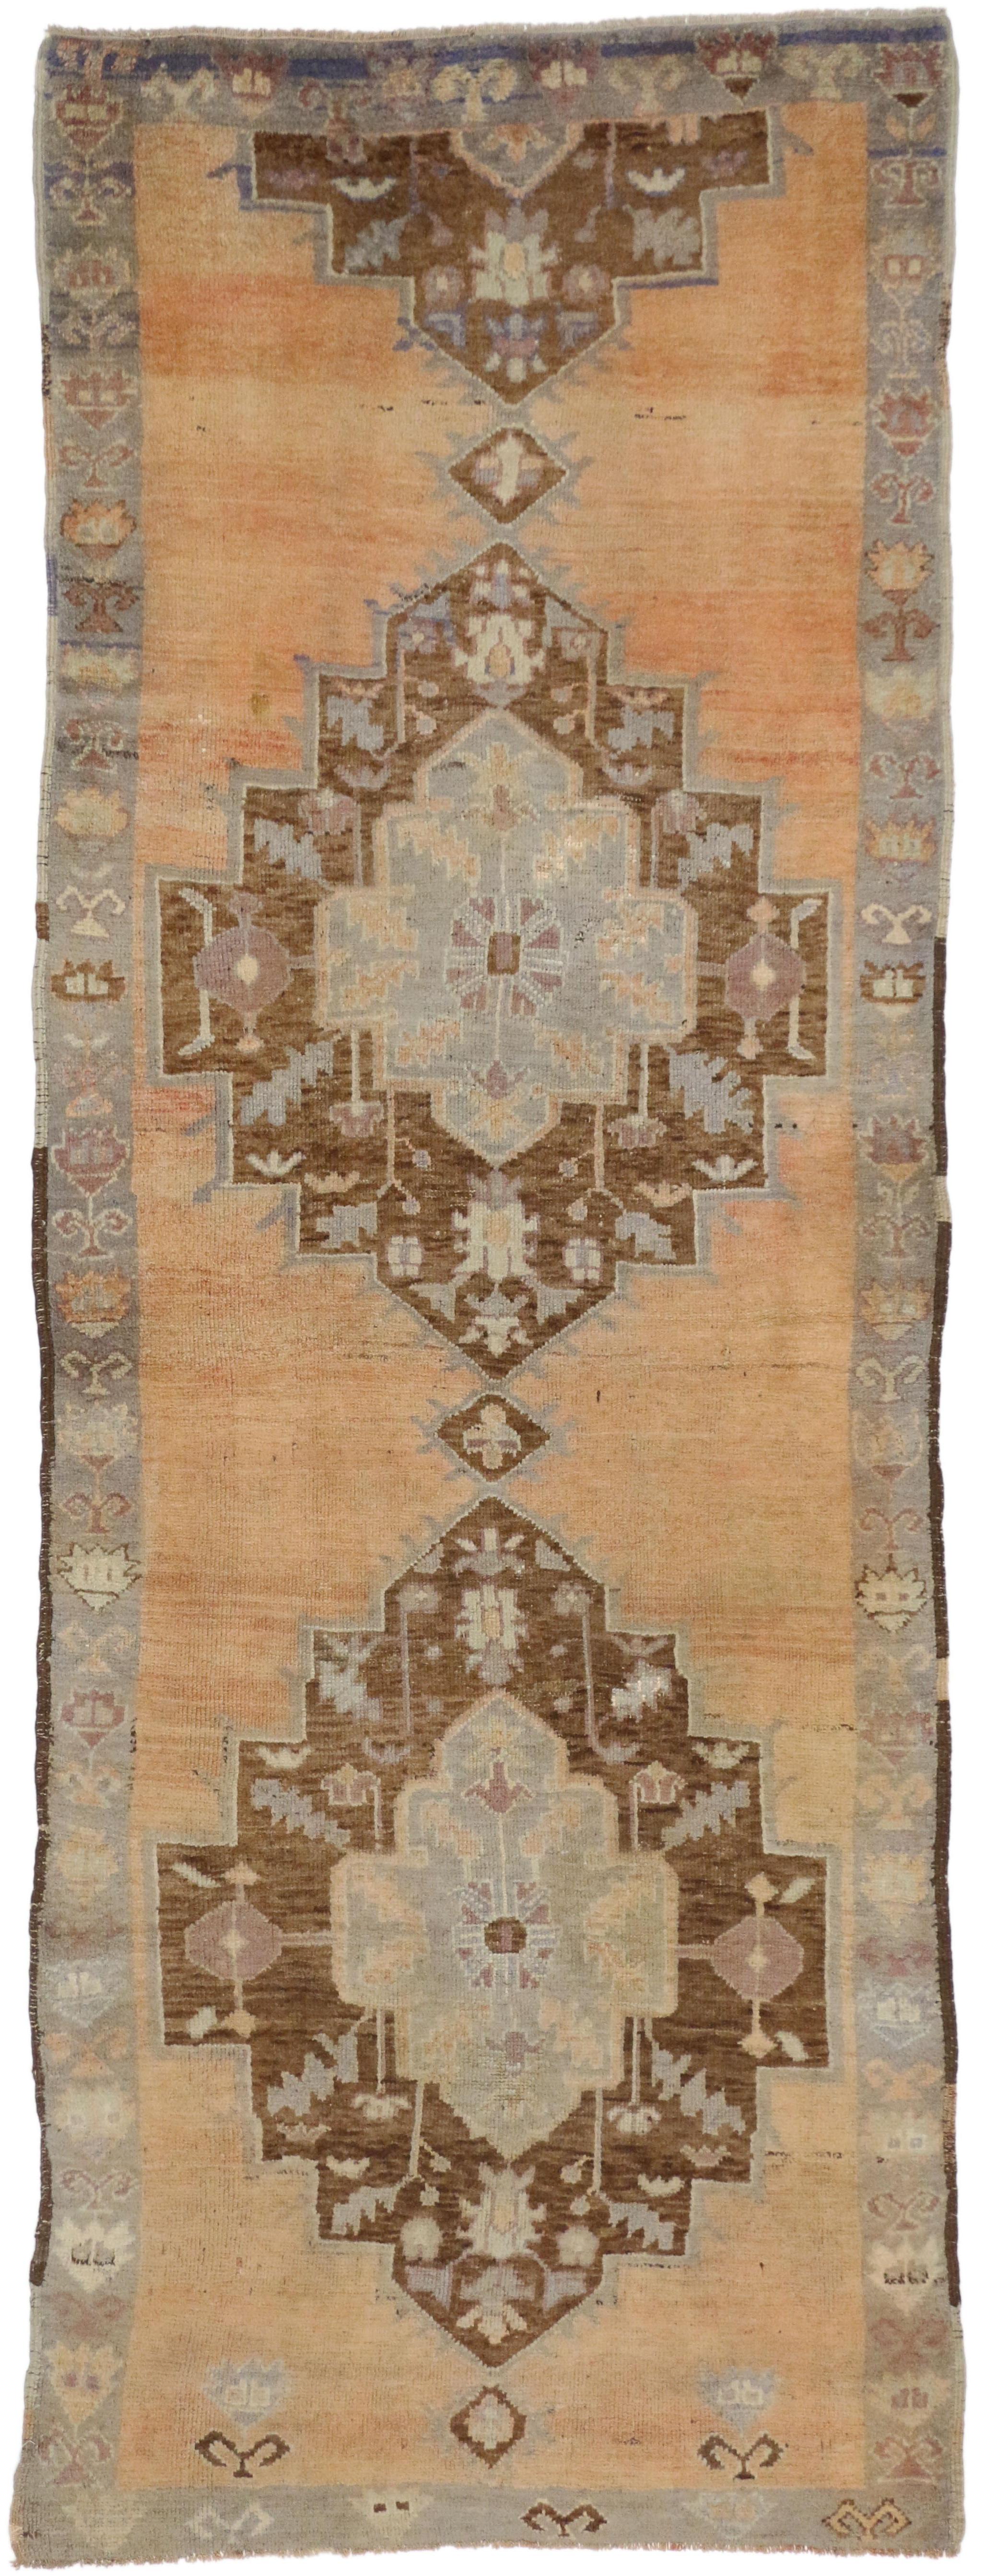 50260 Vintage Turkish Oushak Runner with Rustic French Provincial Style 03'06 x 09'10. Balancing great elegance and grace with warm pastel colors, this hand-knotted wool vintage Turkish Oushak runner beautifully embodies a French Provincial style